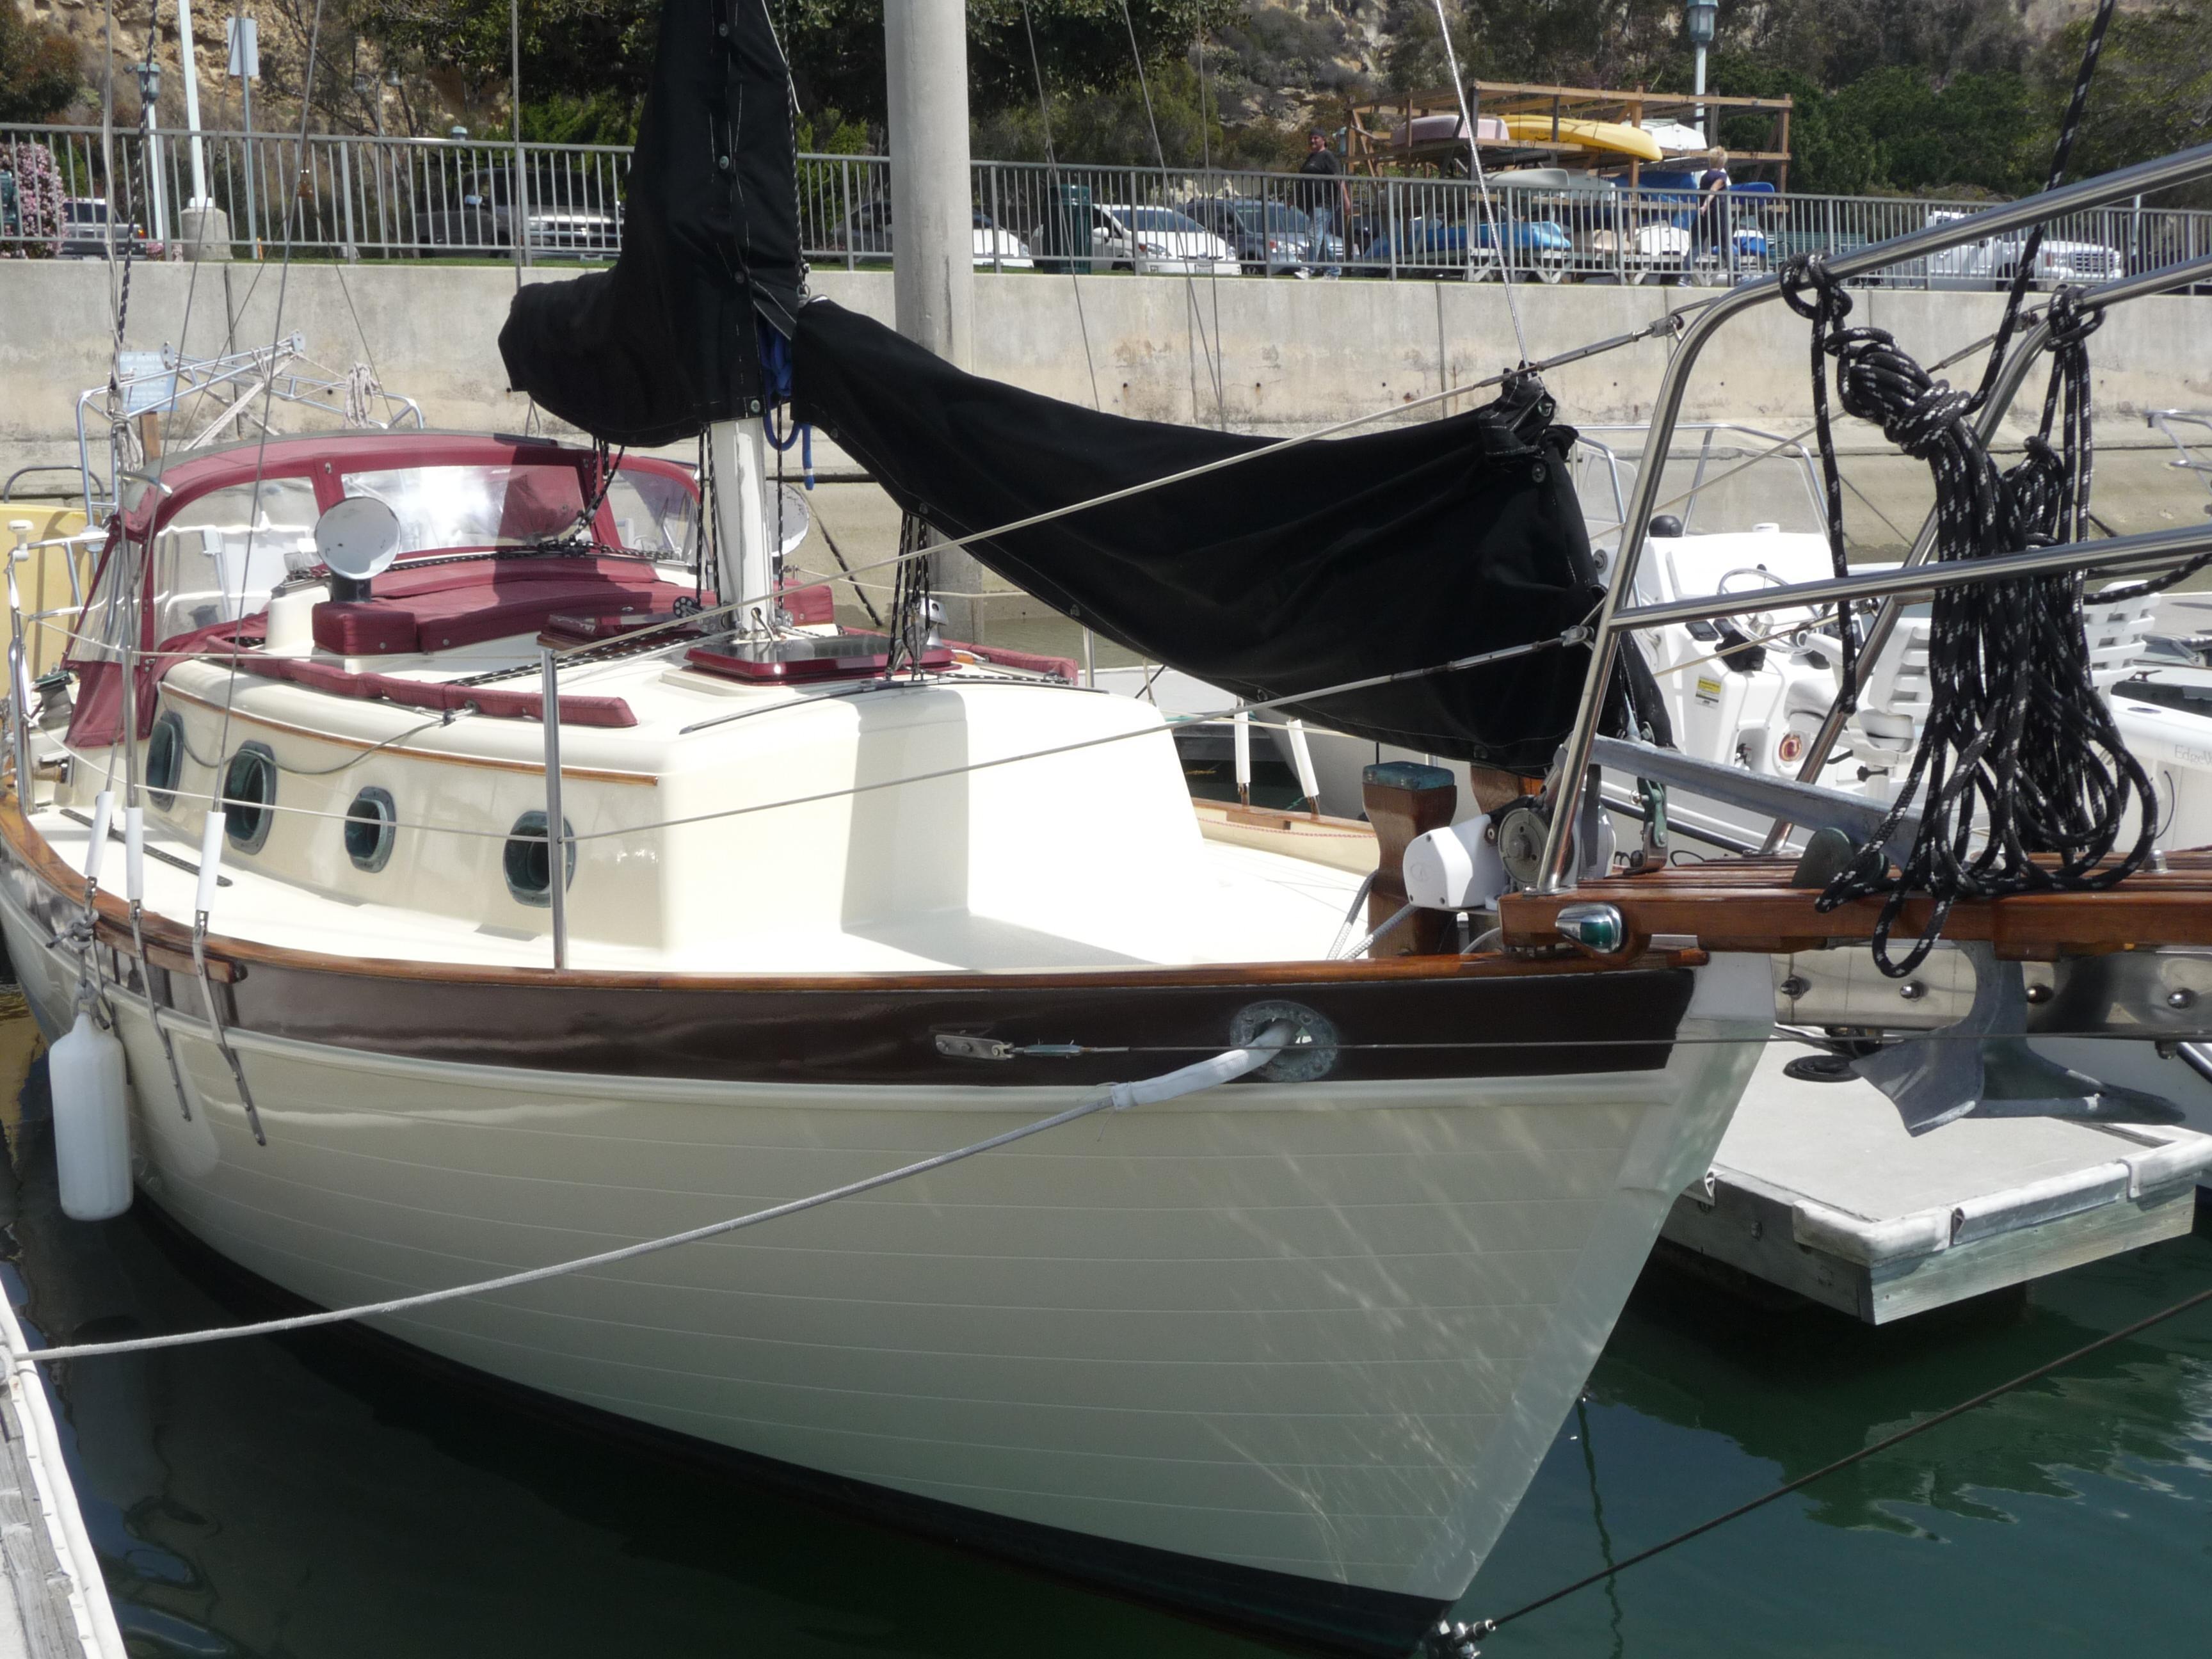 Pacific Seacraft Orion 27, Dana Point